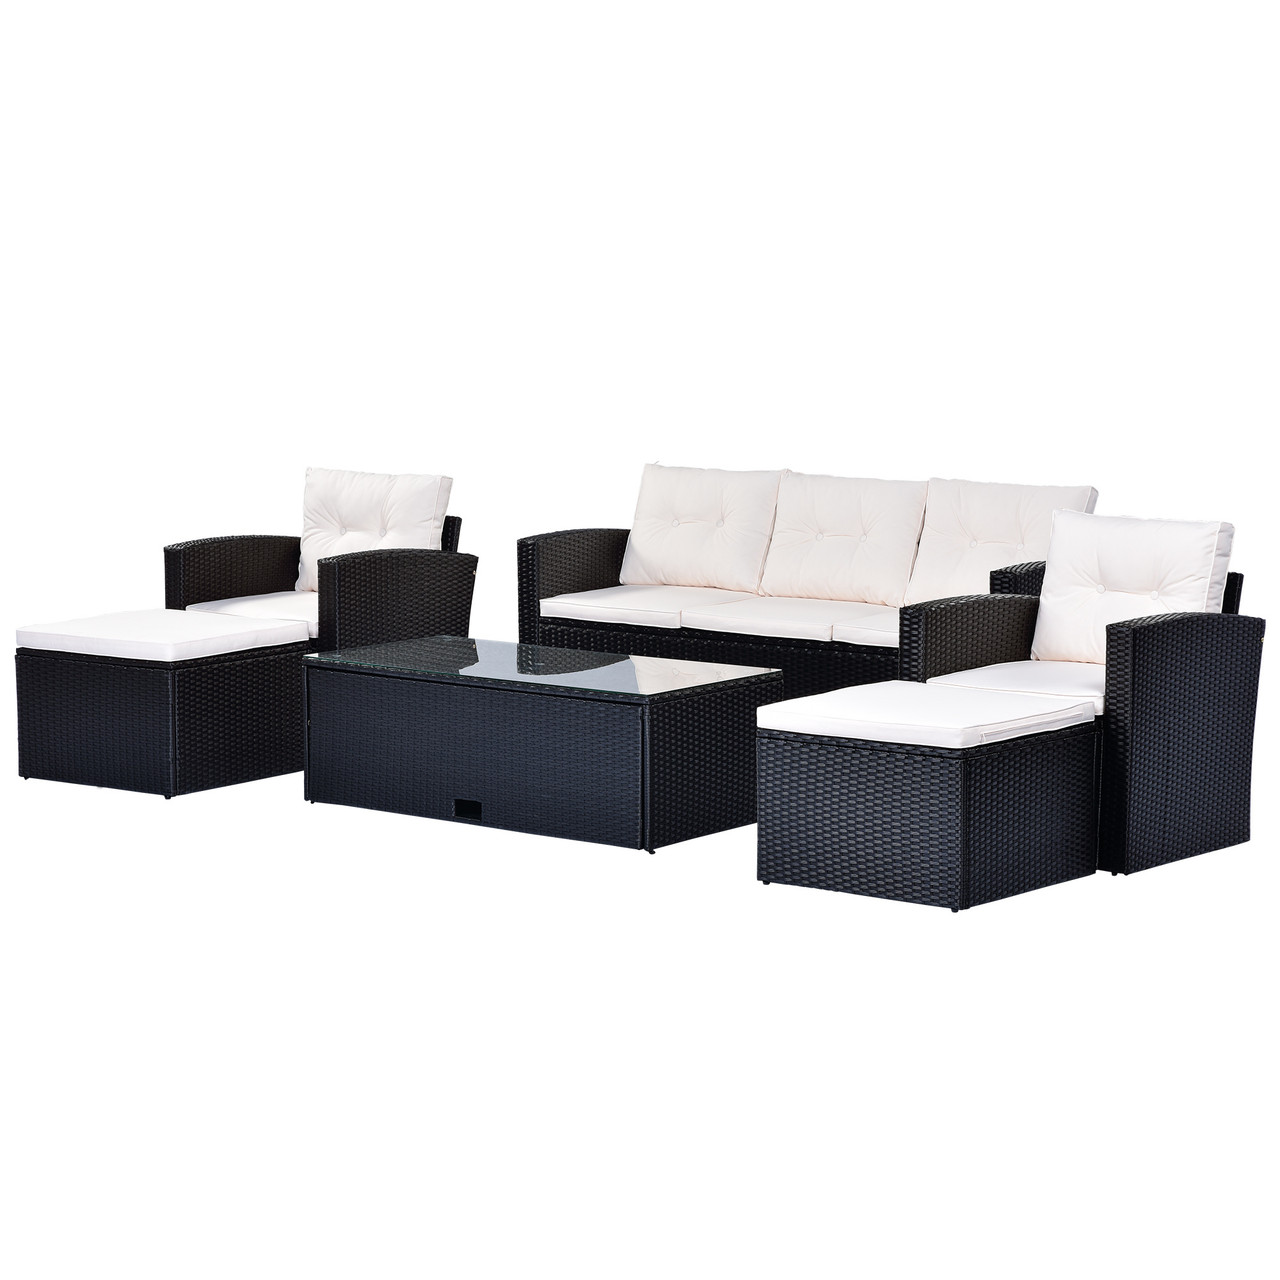 All-Weather Wicker PE Rattan 6-Piece Patio Dining Set - Includes Sofas, Ottomans, Coffee Table & Removable Cushions